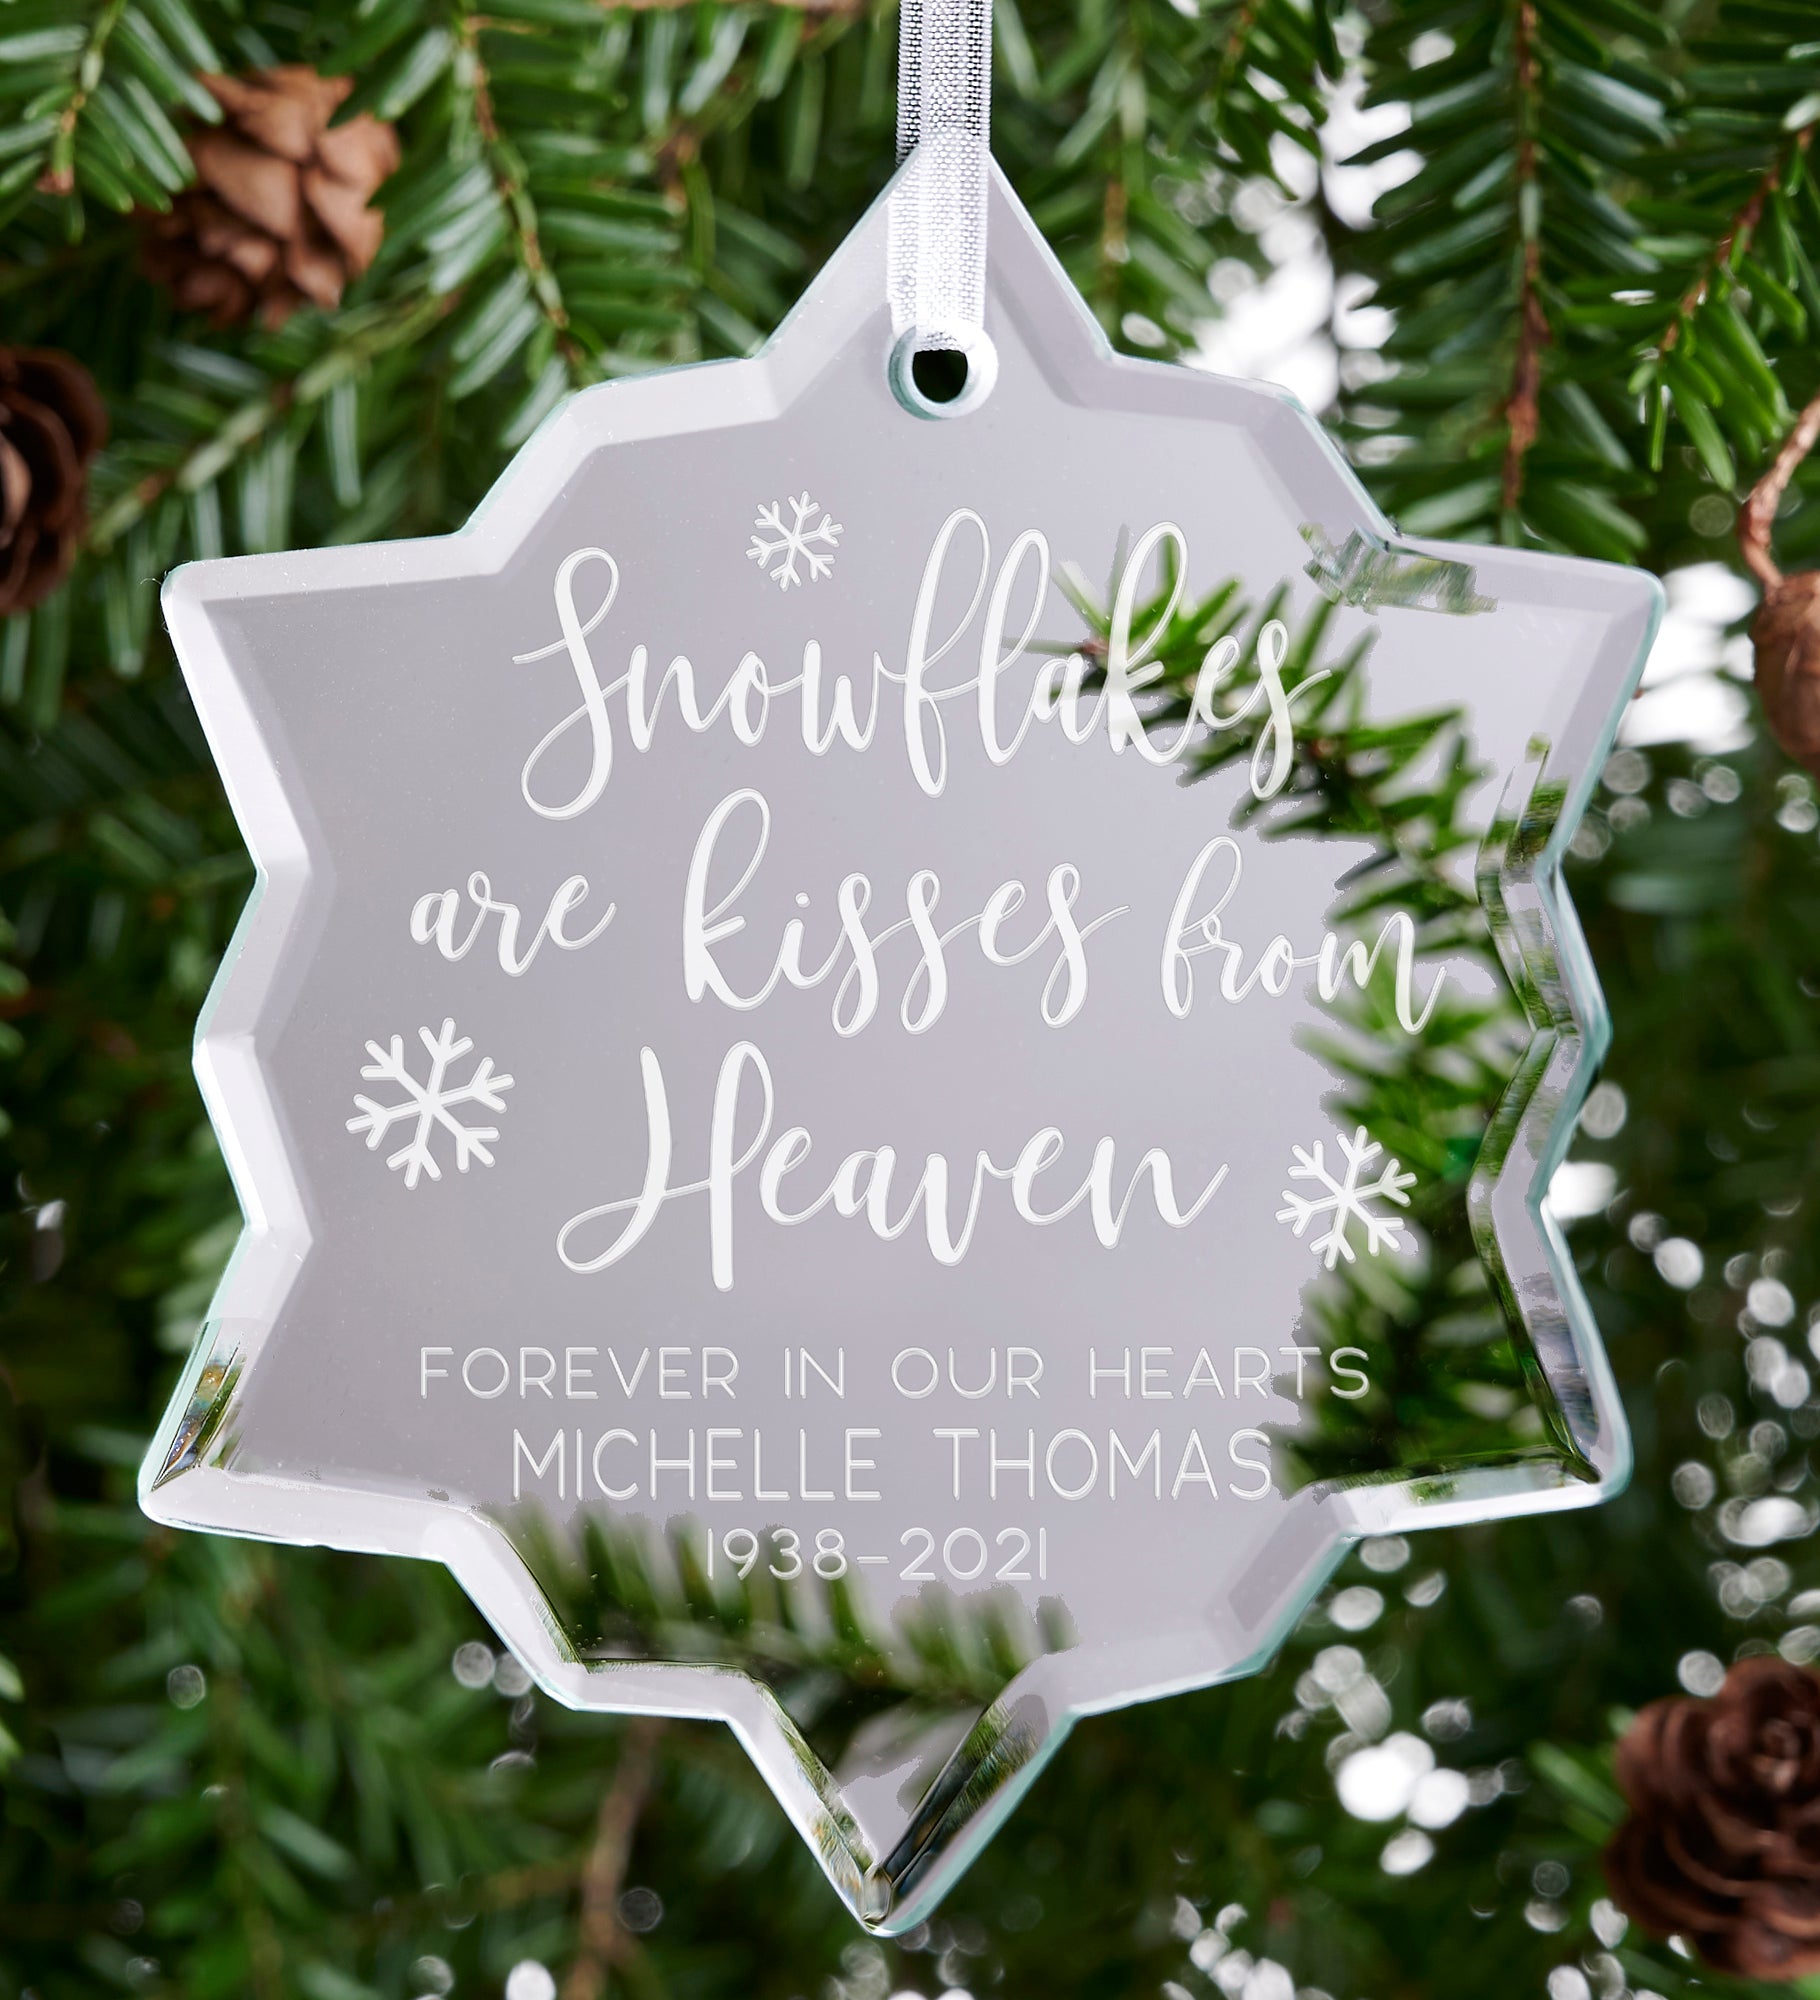 Snowflake Kisses From Heaven Personalized Memorial Mirror Ornament